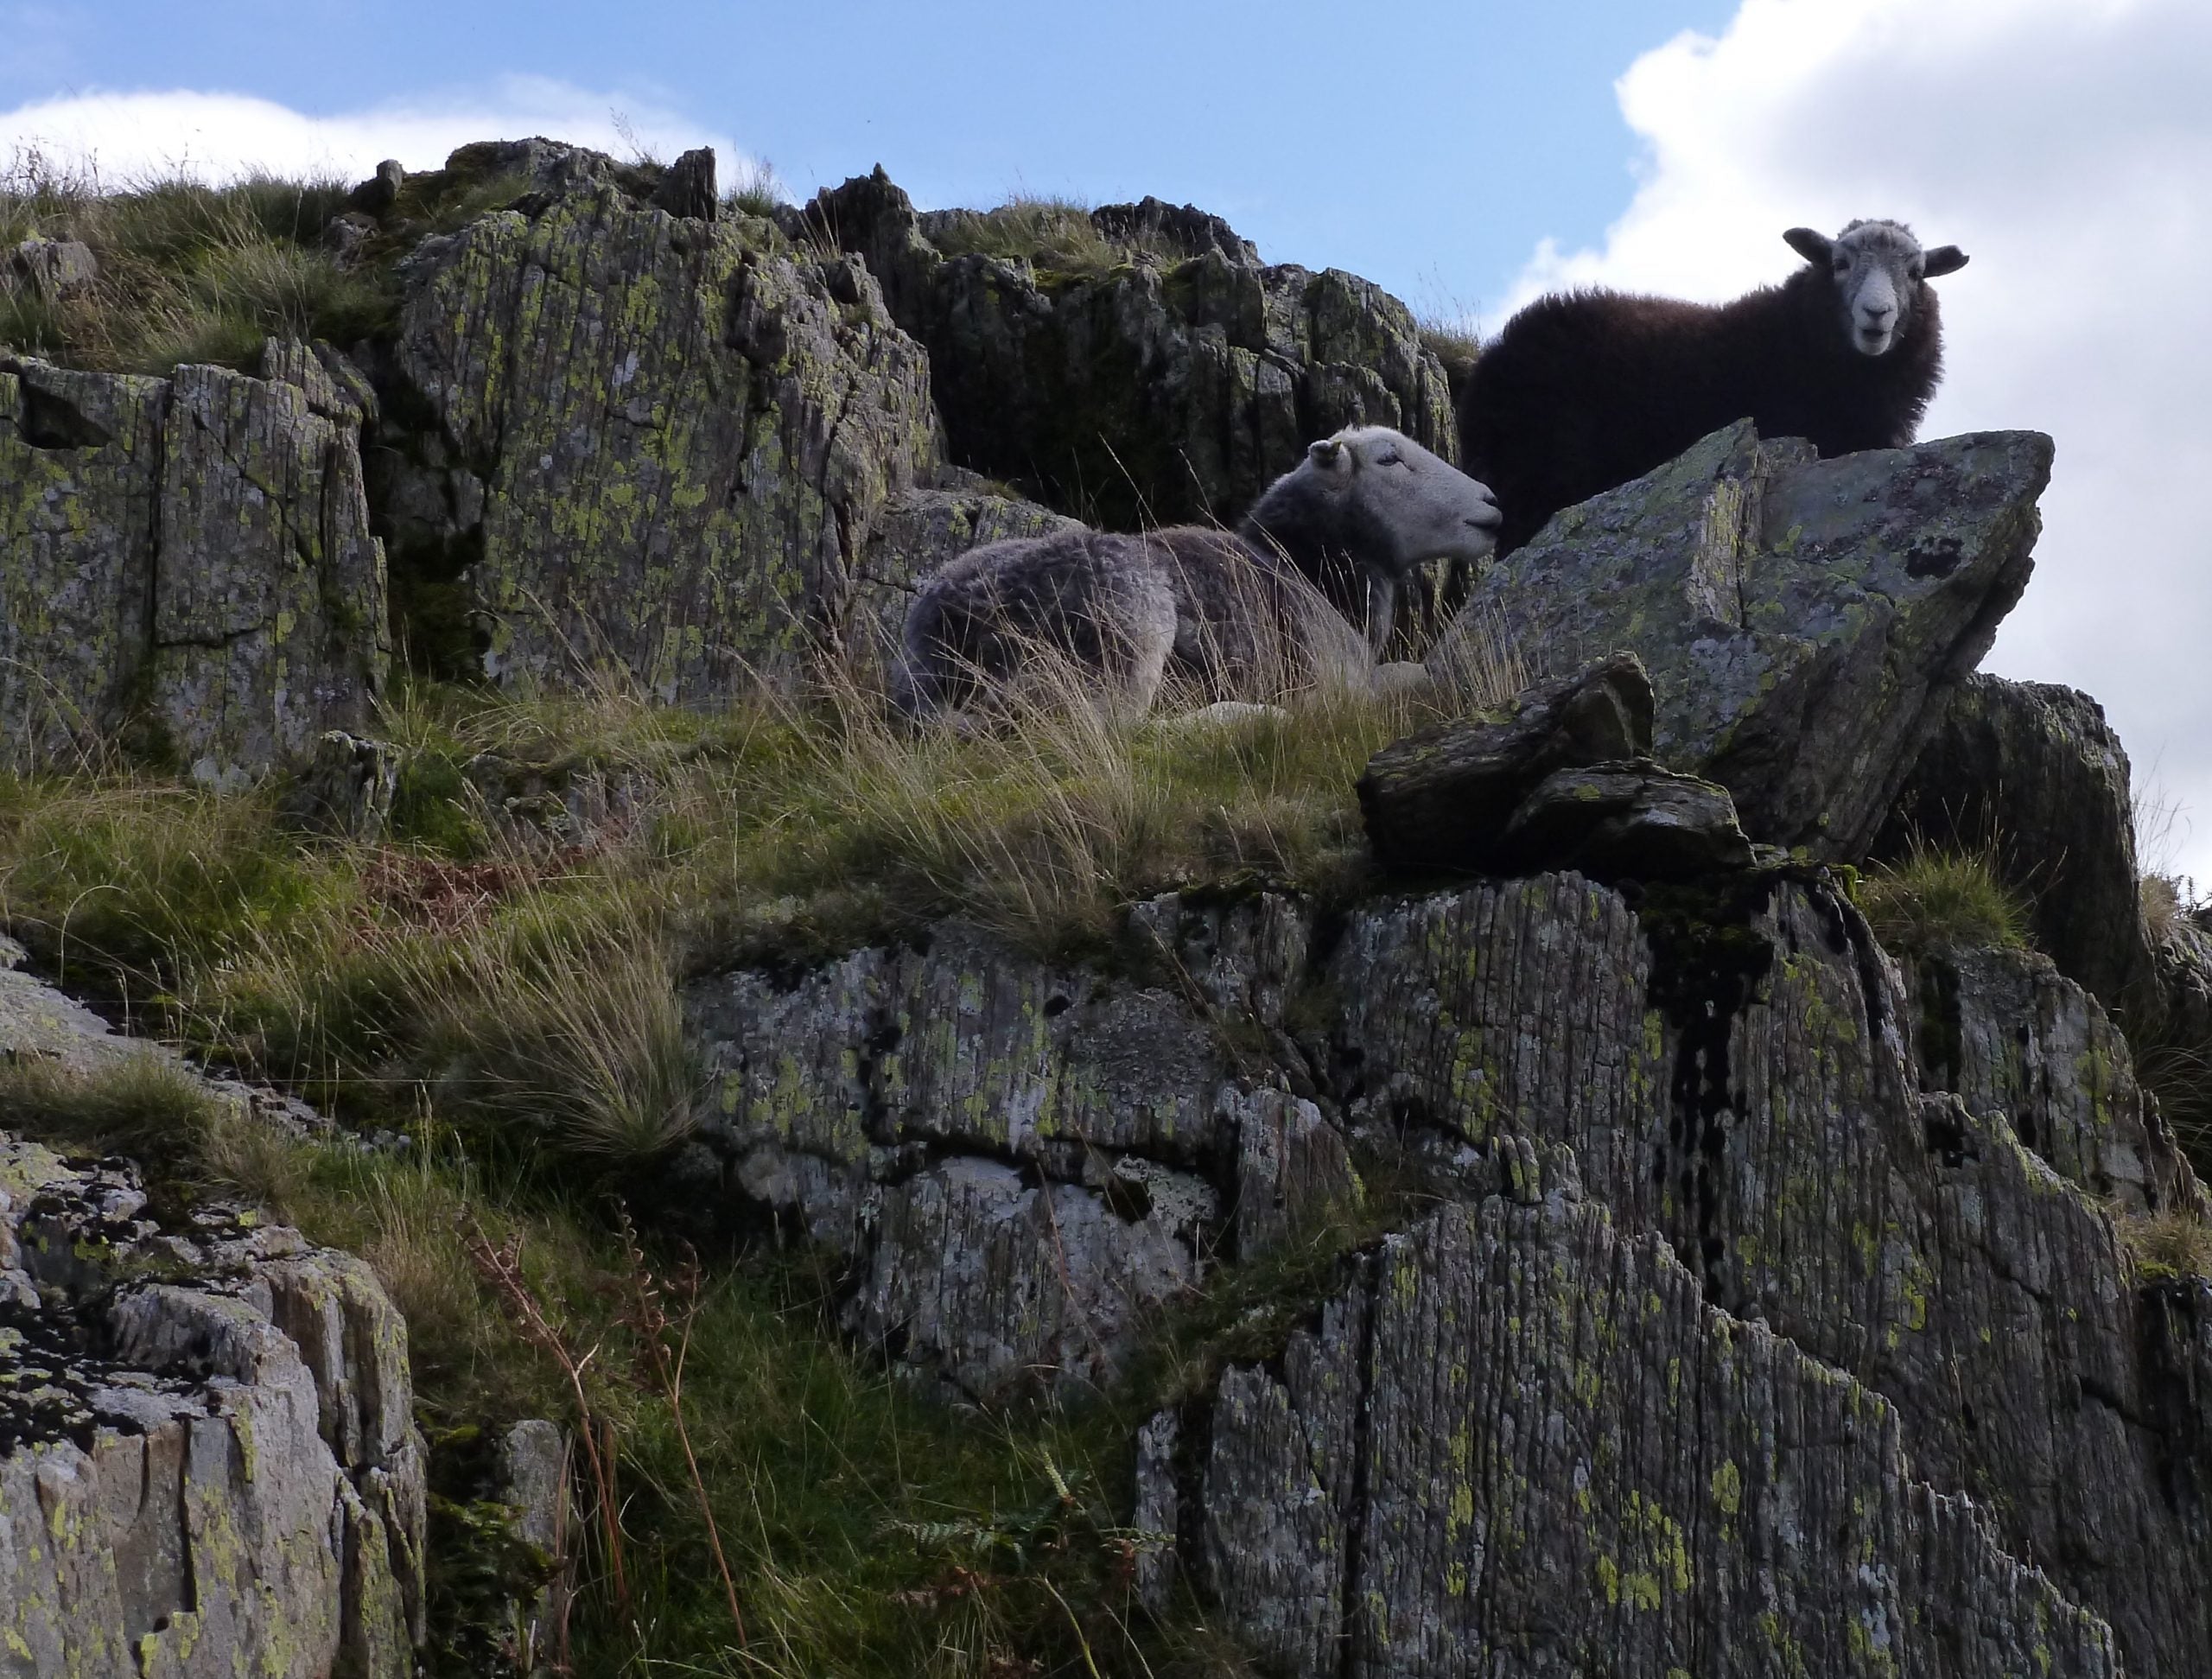 herdwick sheep perched on a craggy rock symbolise the durability of the Chimney Sheep